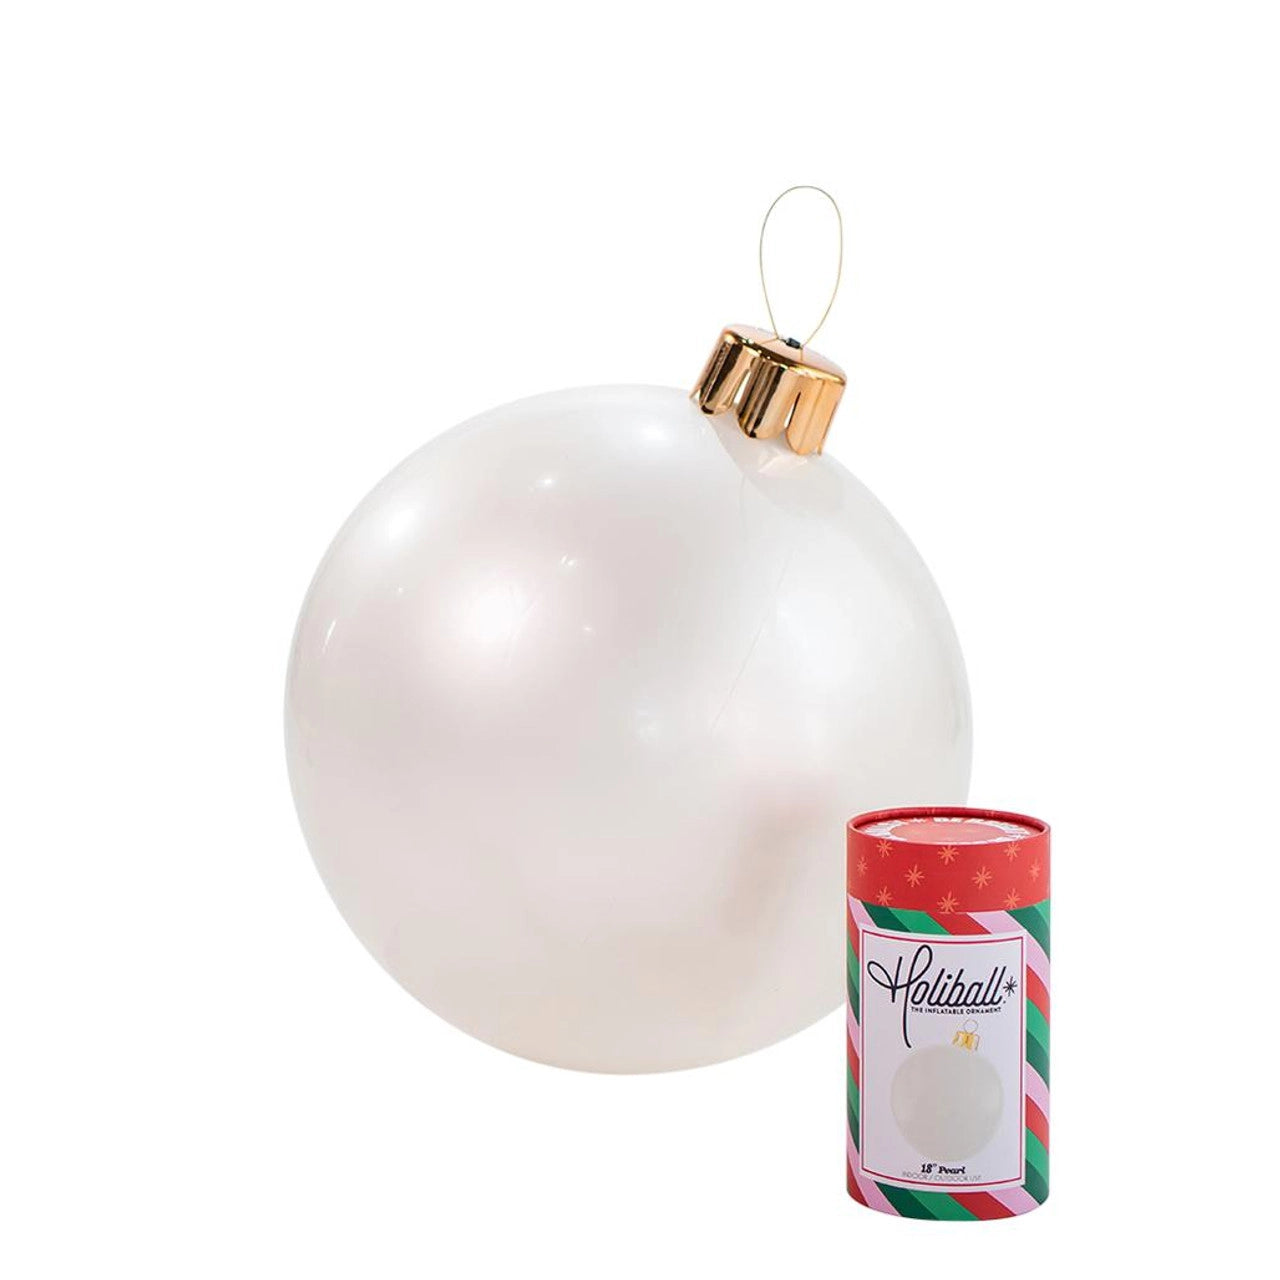 Holiball® - The Inflatable Ornament (18" Pearl White) - Five and Divine